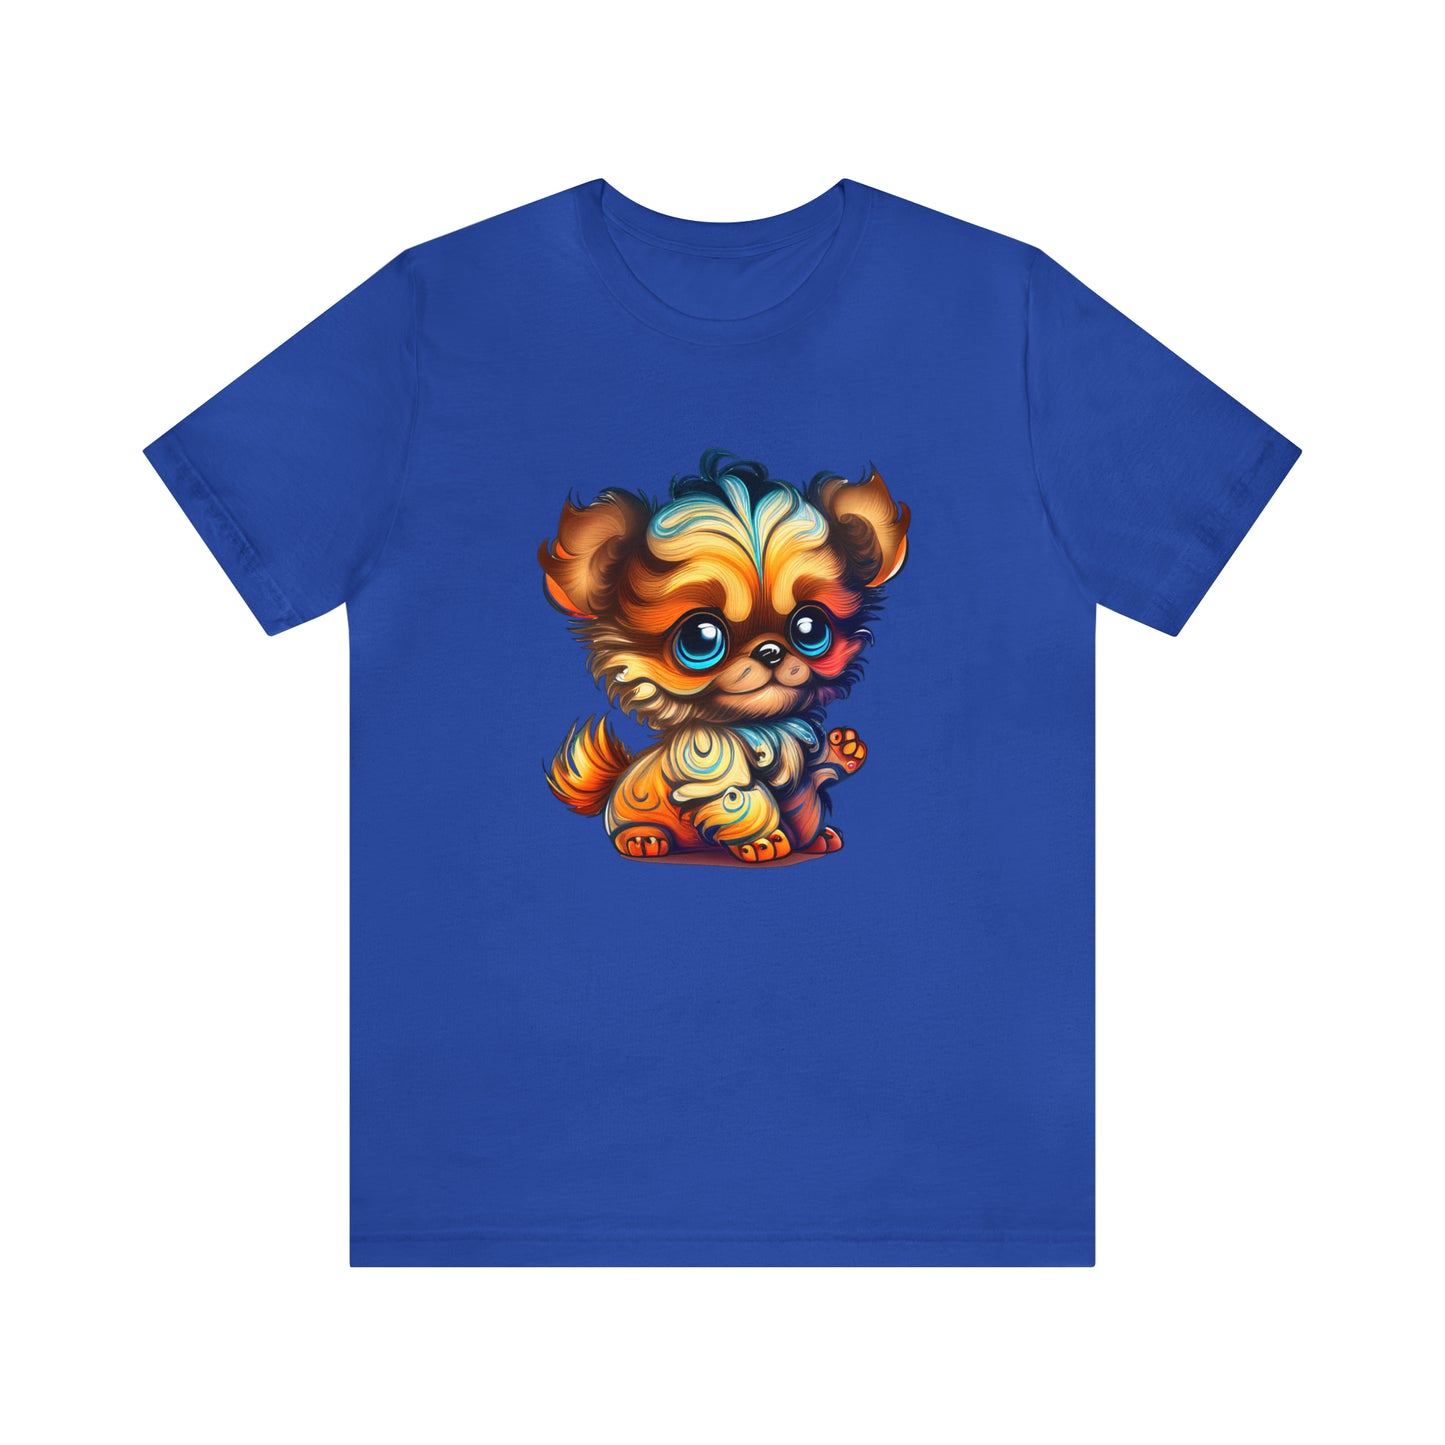 psychedelicBRANDz's Woof Wave Wonder featuring a cute puppy on a royal blueshirt